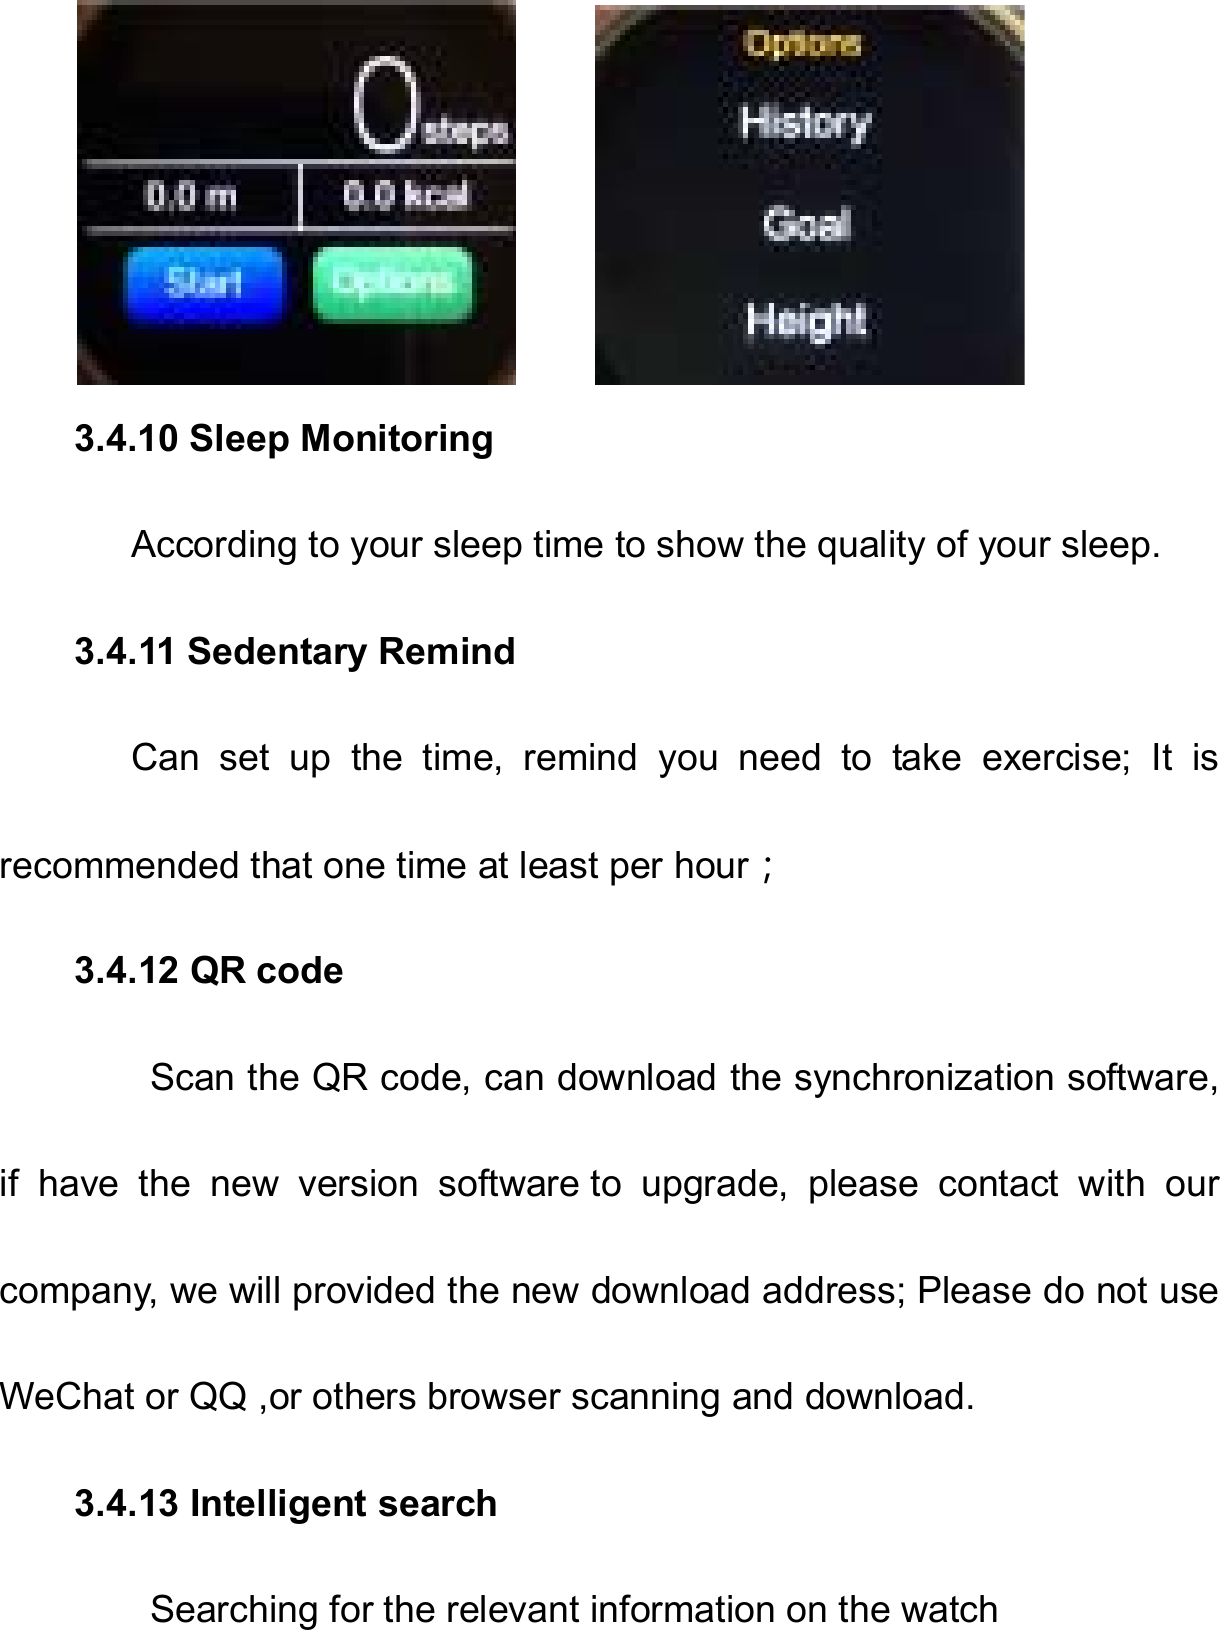         3.4.10 Sleep Monitoring       According to your sleep time to show the quality of your sleep. 3.4.11 Sedentary Remind       Can  set  up  the  time,  remind  you  need  to  take  exercise;  It  is recommended that one time at least per hour； 3.4.12 QR code         Scan the QR code, can download the synchronization software, if  have  the  new  version  software to  upgrade,  please  contact  with  our company, we will provided the new download address; Please do not use WeChat or QQ ,or others browser scanning and download. 3.4.13 Intelligent search         Searching for the relevant information on the watch 